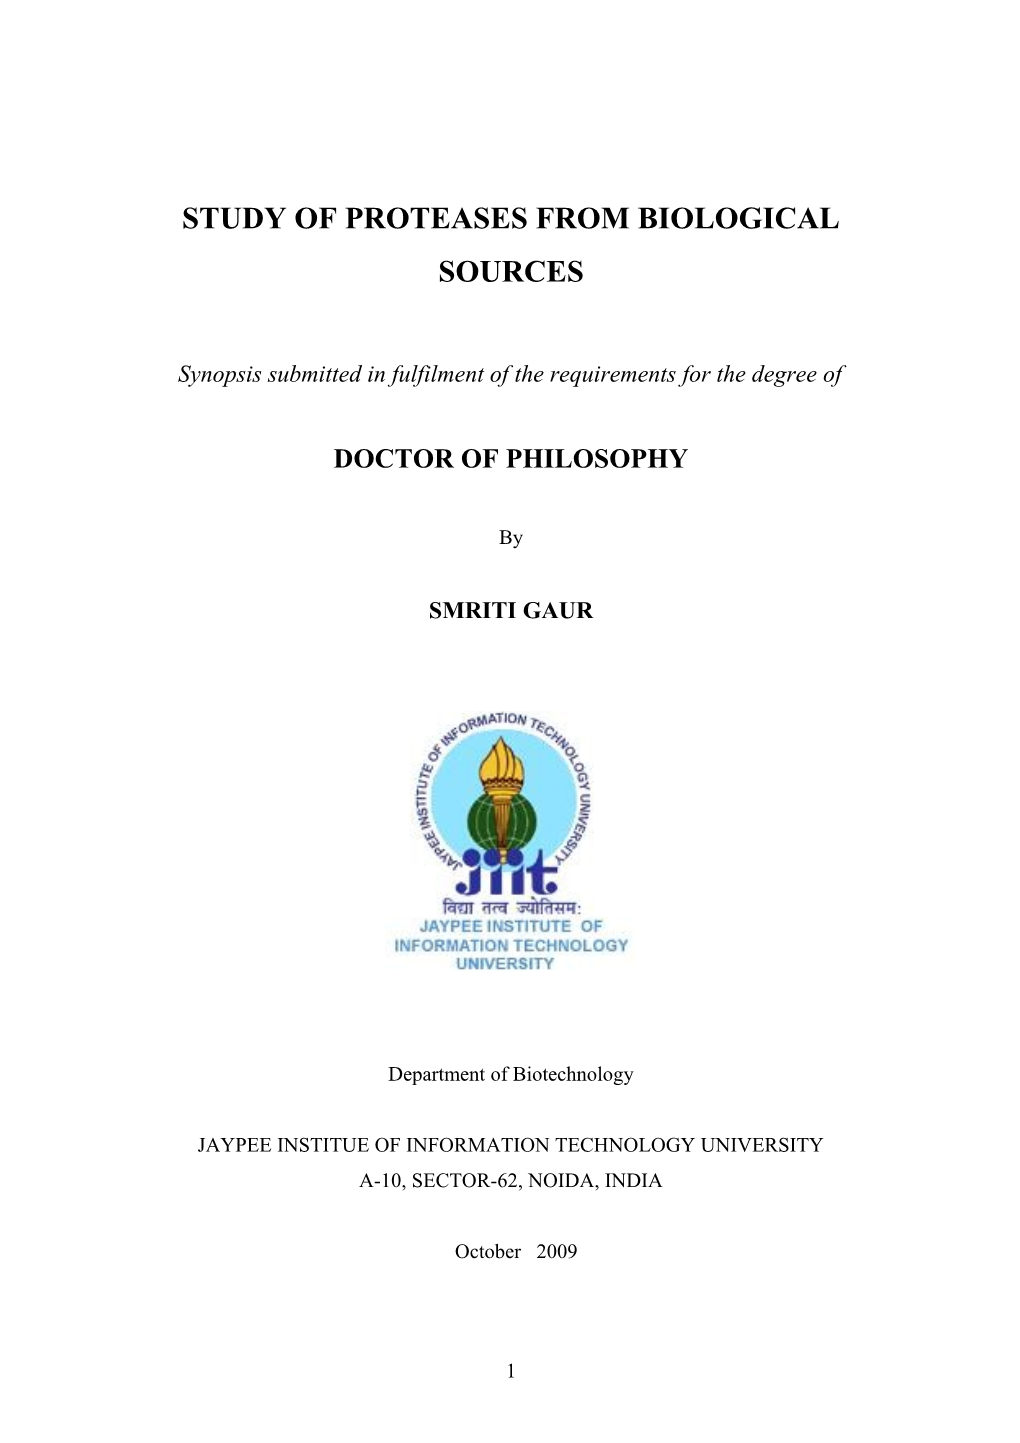 Study of Proteases from Biological Sources